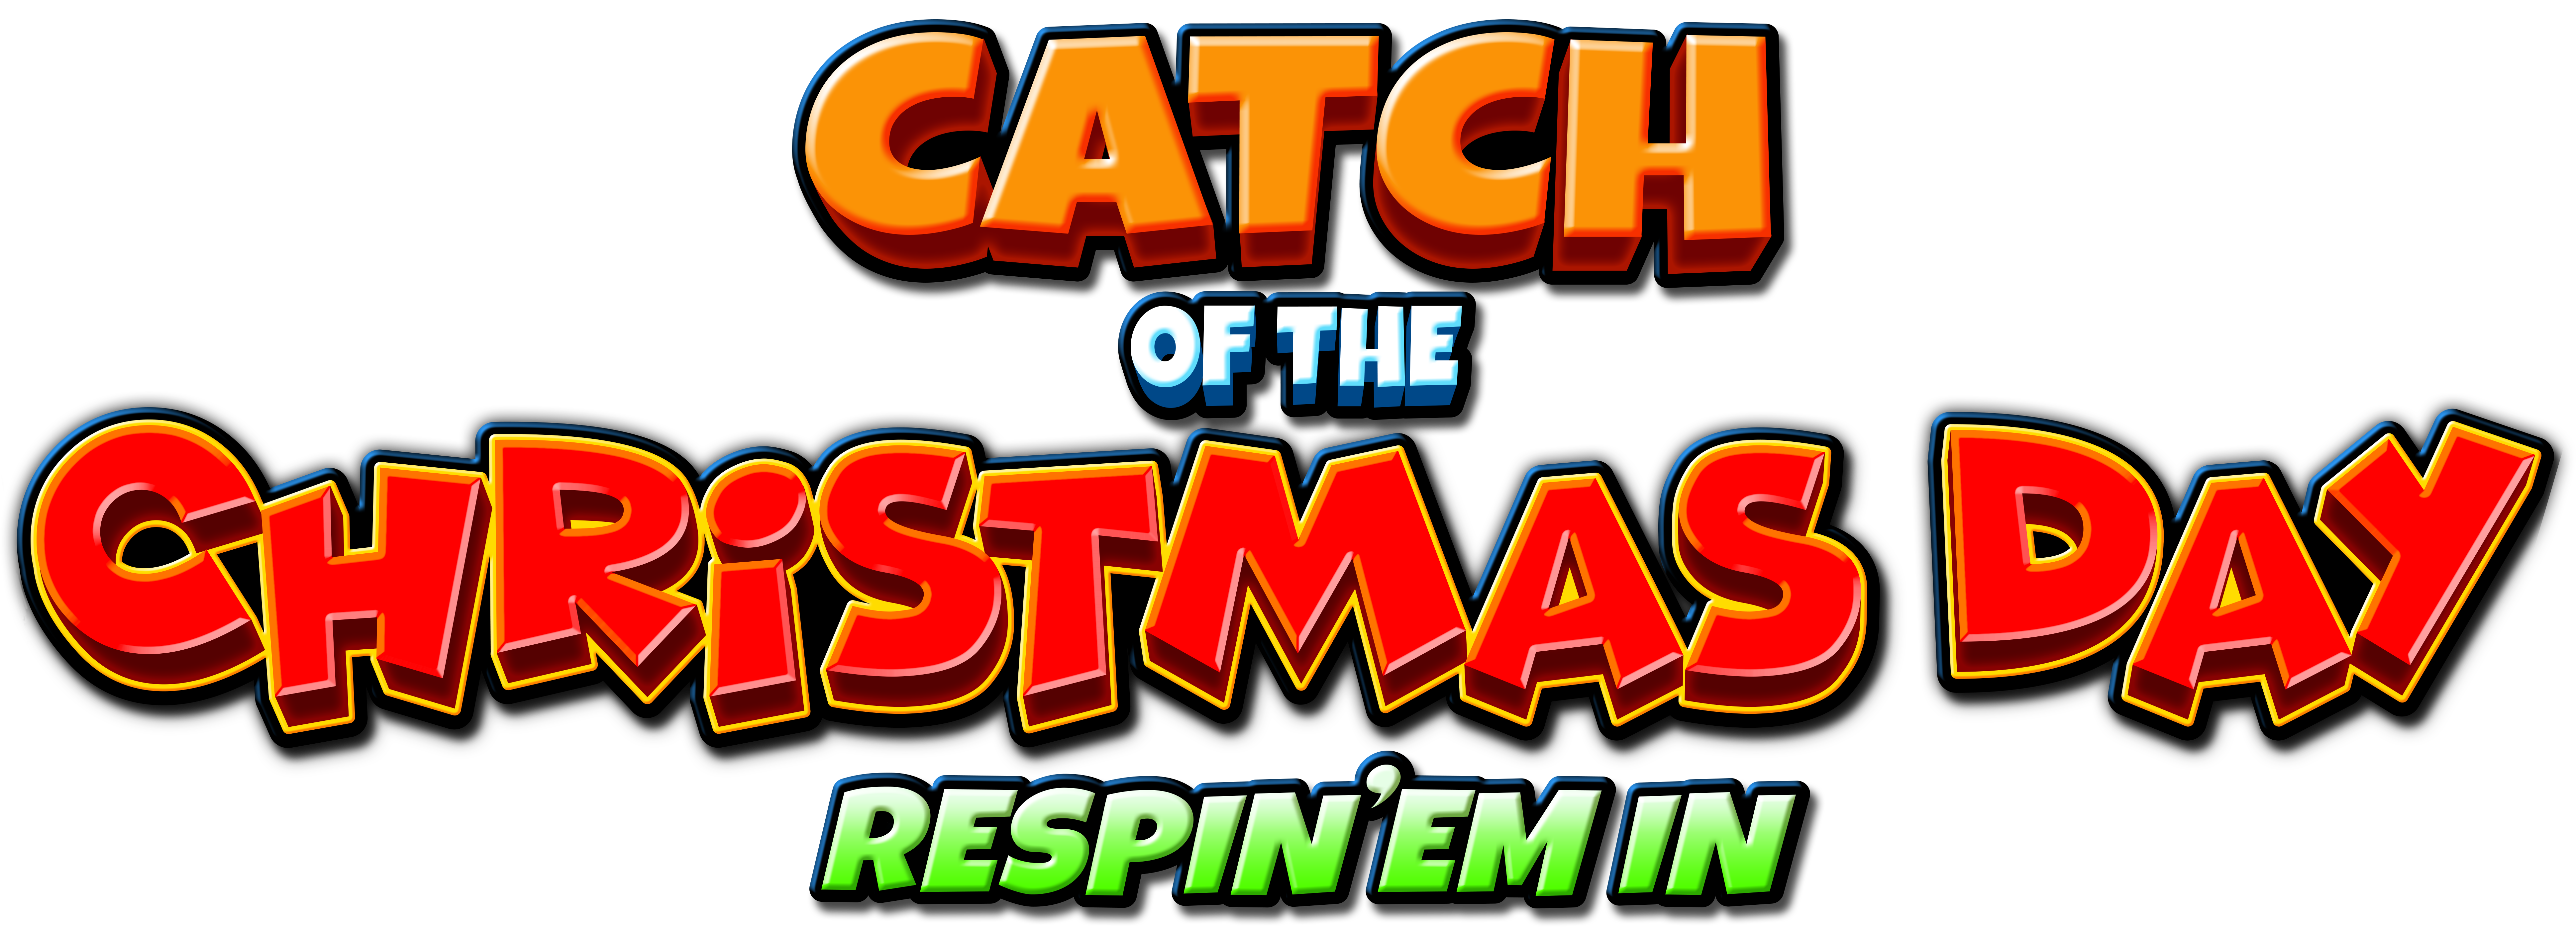 CATCH OF THE CHRISTMAS DAY RESPIN ‘EM IN LOGO